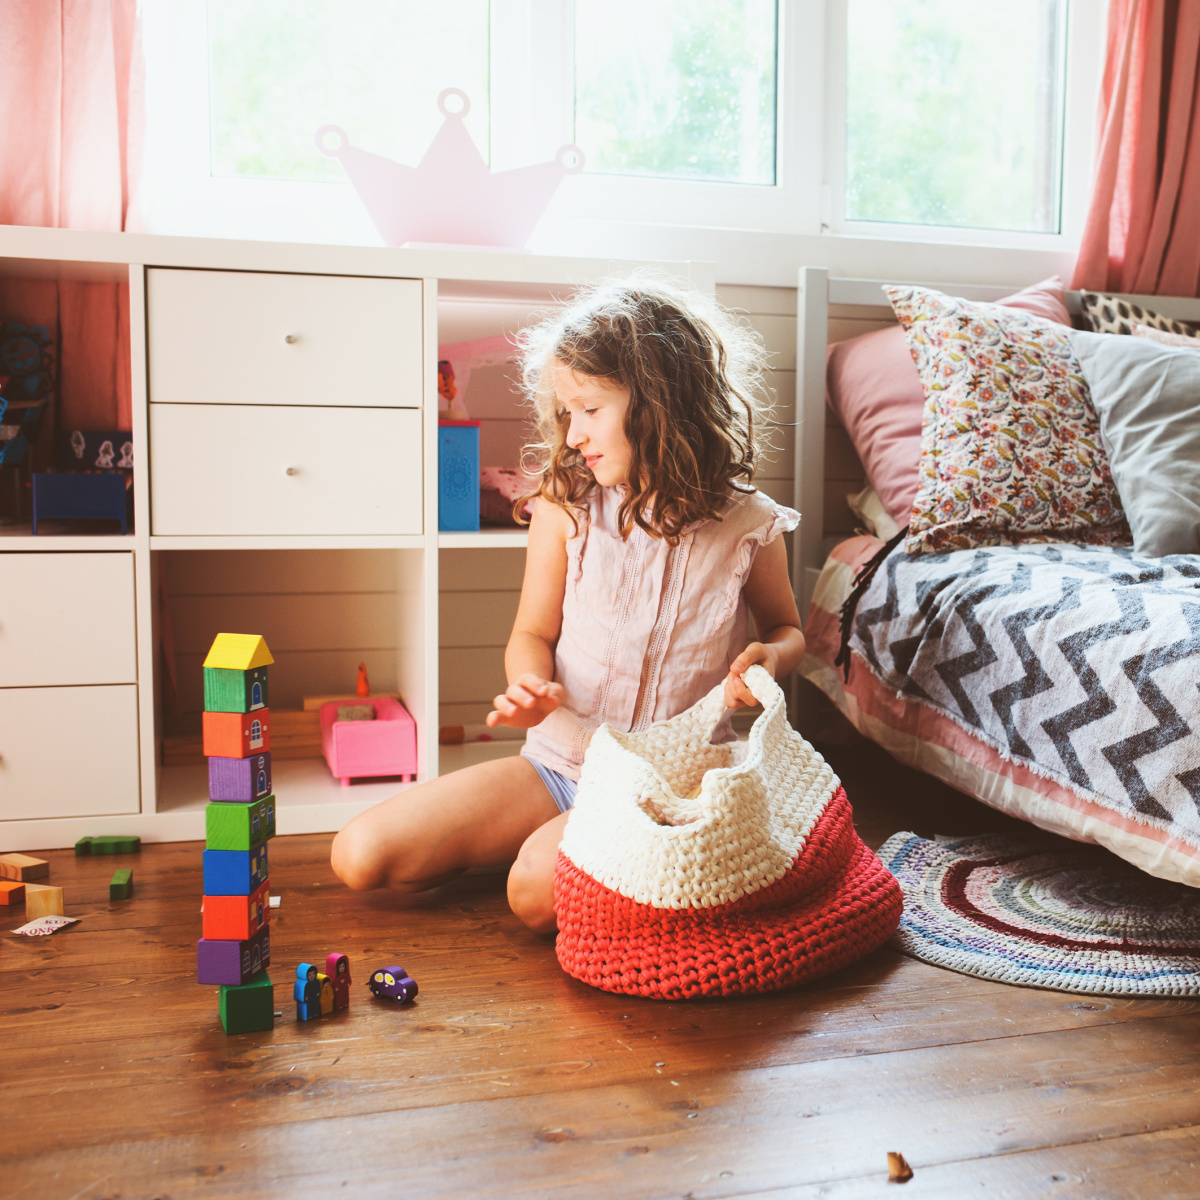 girl in bedroom with toys and a basket kids can learn organization skills for their toys, clothes, rooms